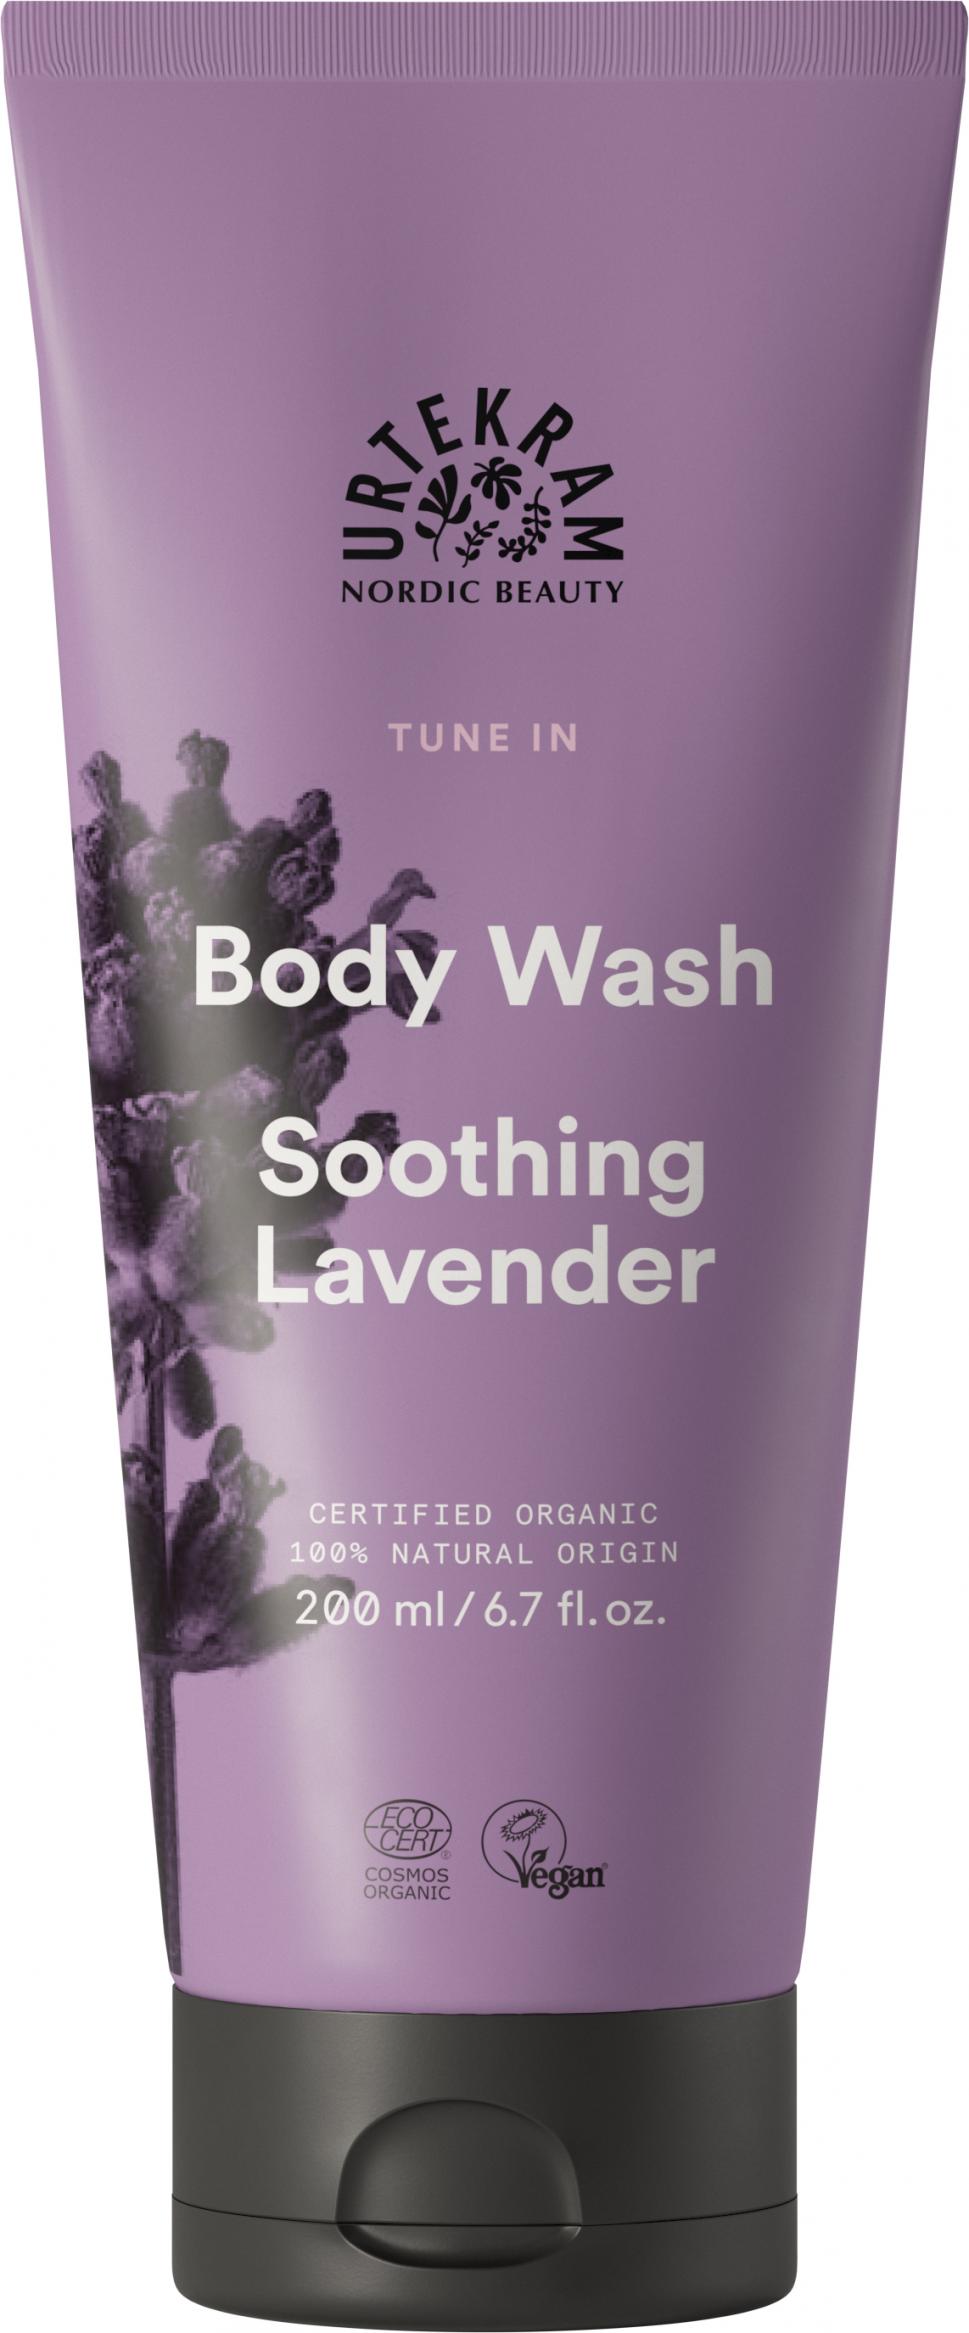 Body Wash Soothing Lavender 200ml